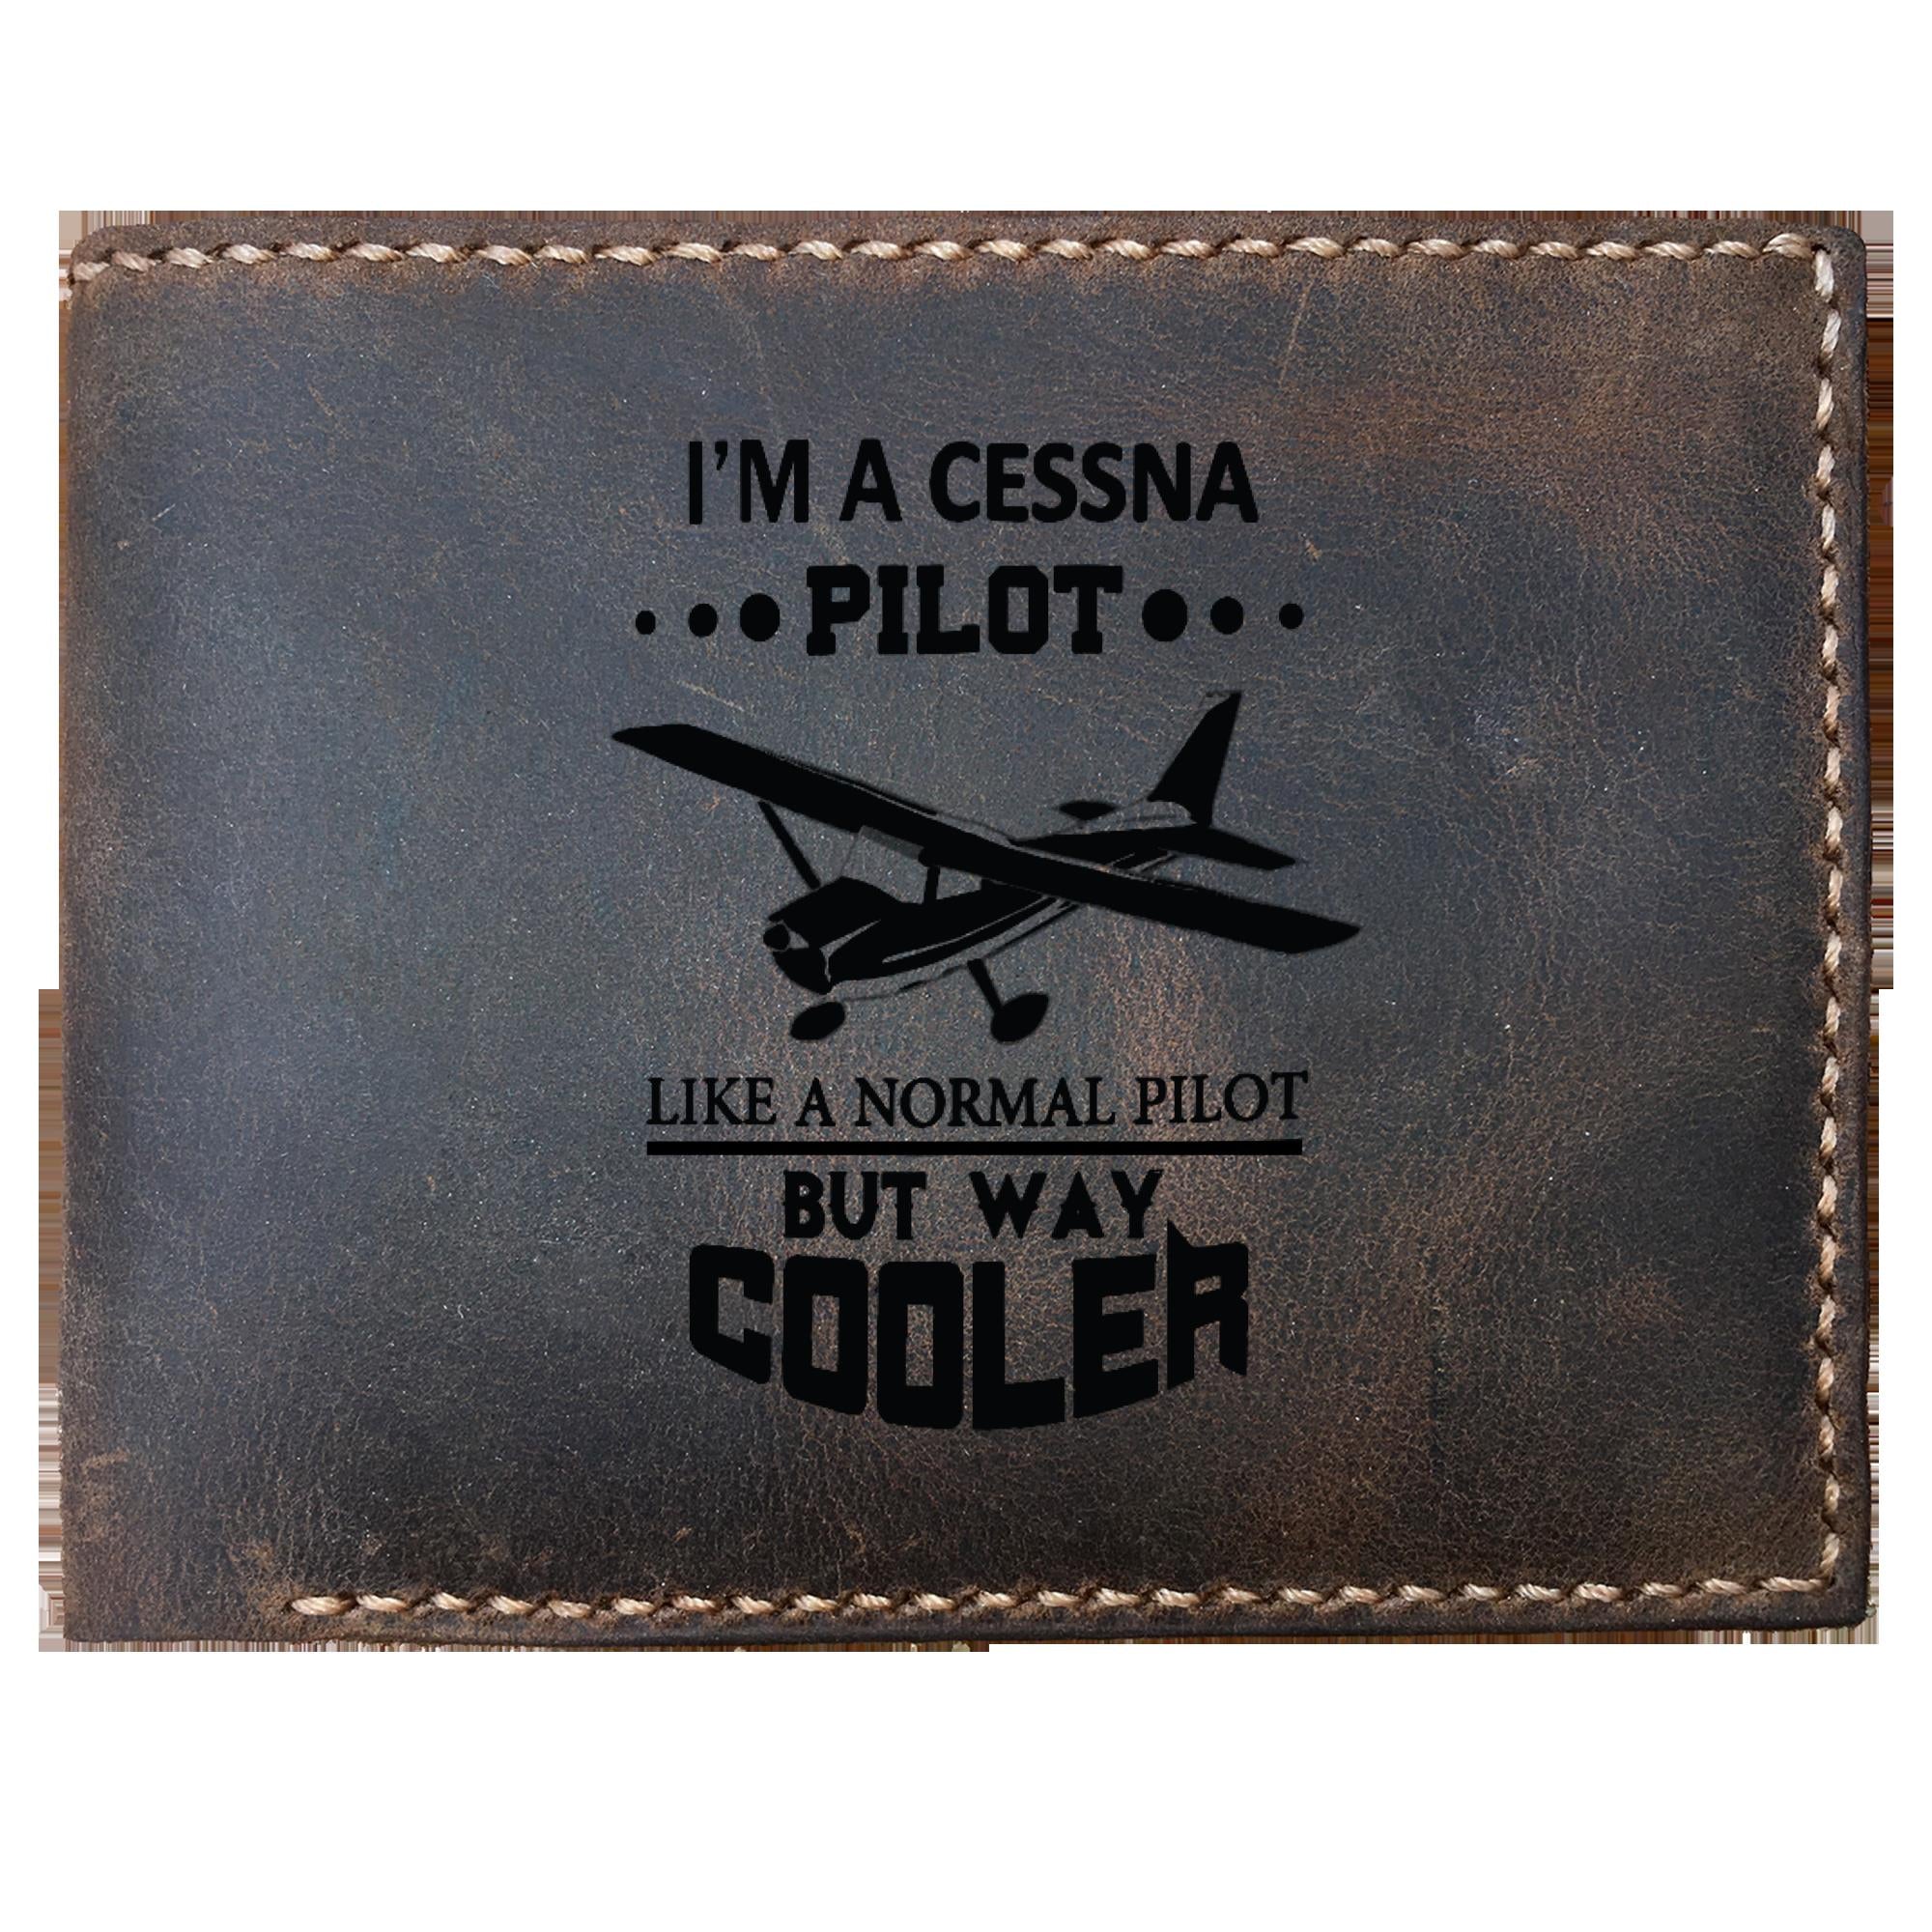 Way Cooler, Cessna Airplane Pilot Funny Skitongifts Custom Laser Engraved Bifold Leather Wallet Vintage